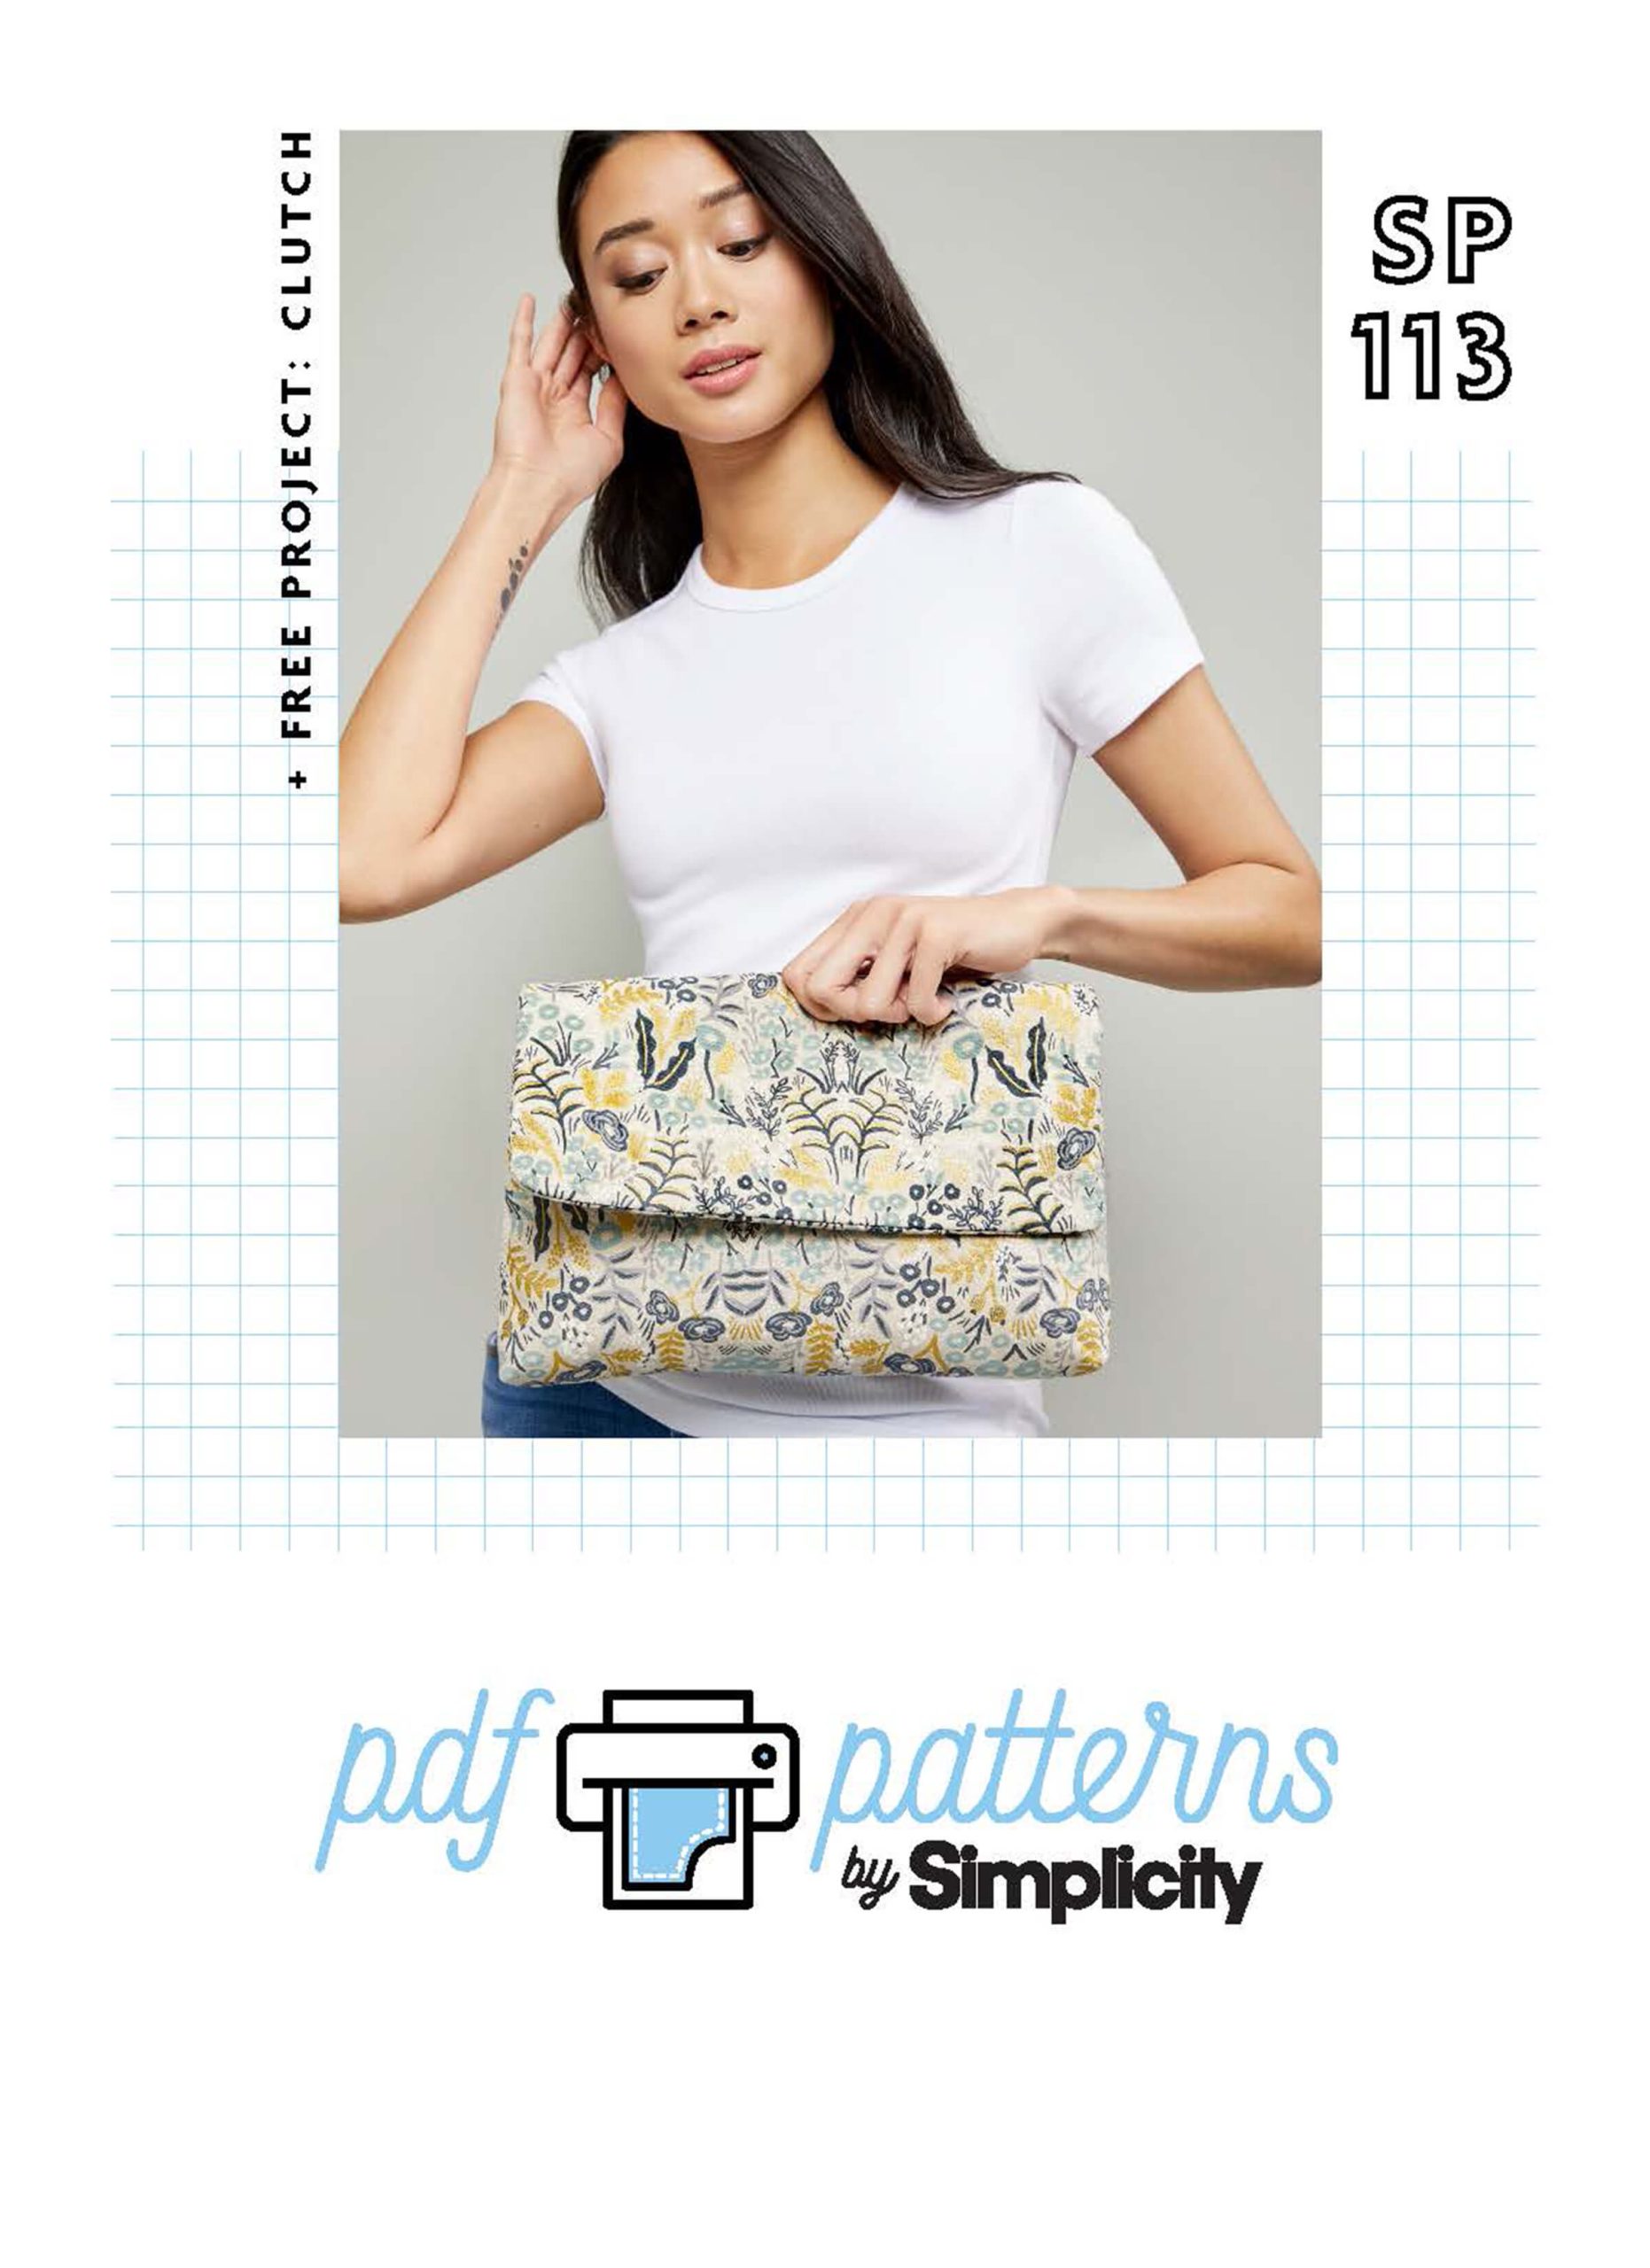 Easy to make clutch purse pattern | Skip To My Lou